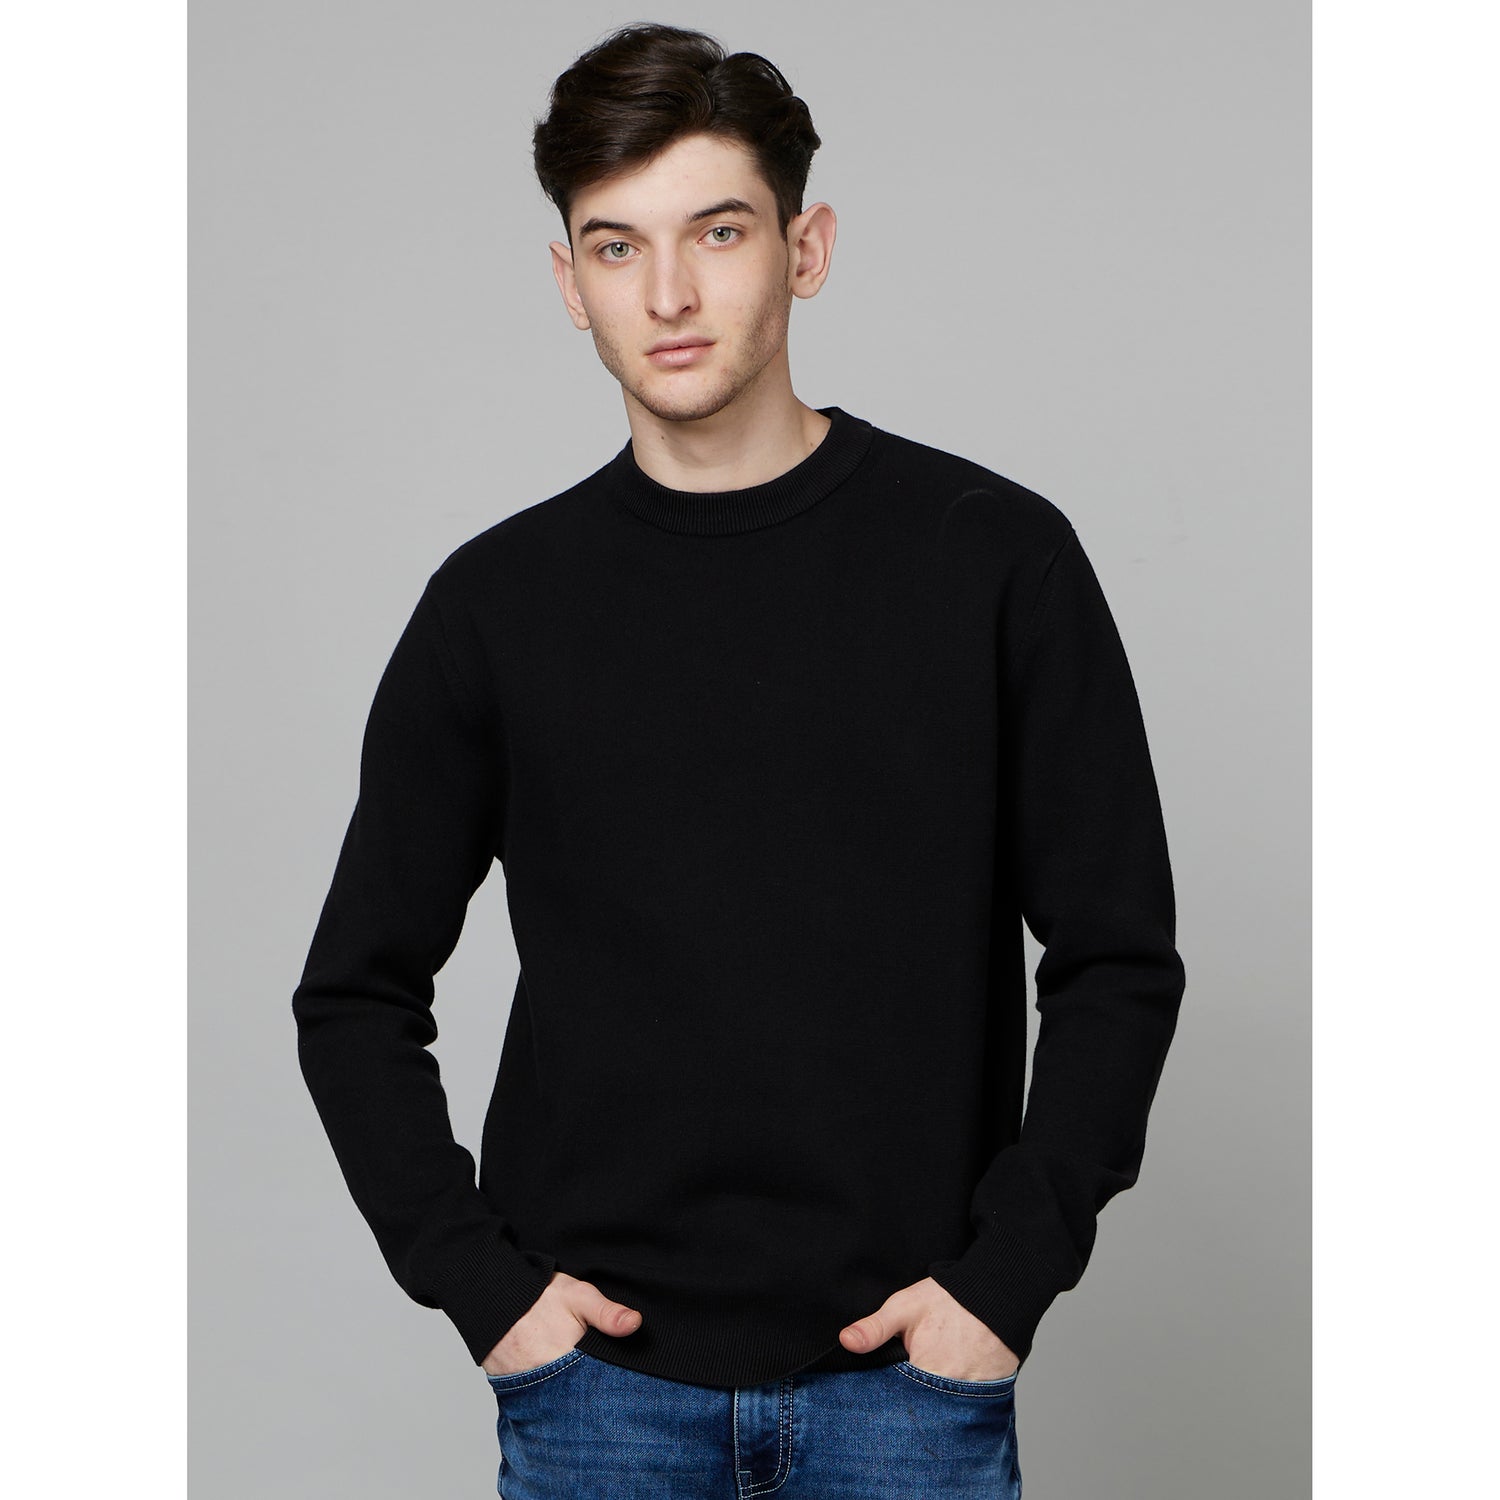 Black Round Neck Full Sleeves Cotton Pullover Sweater (BECLO)